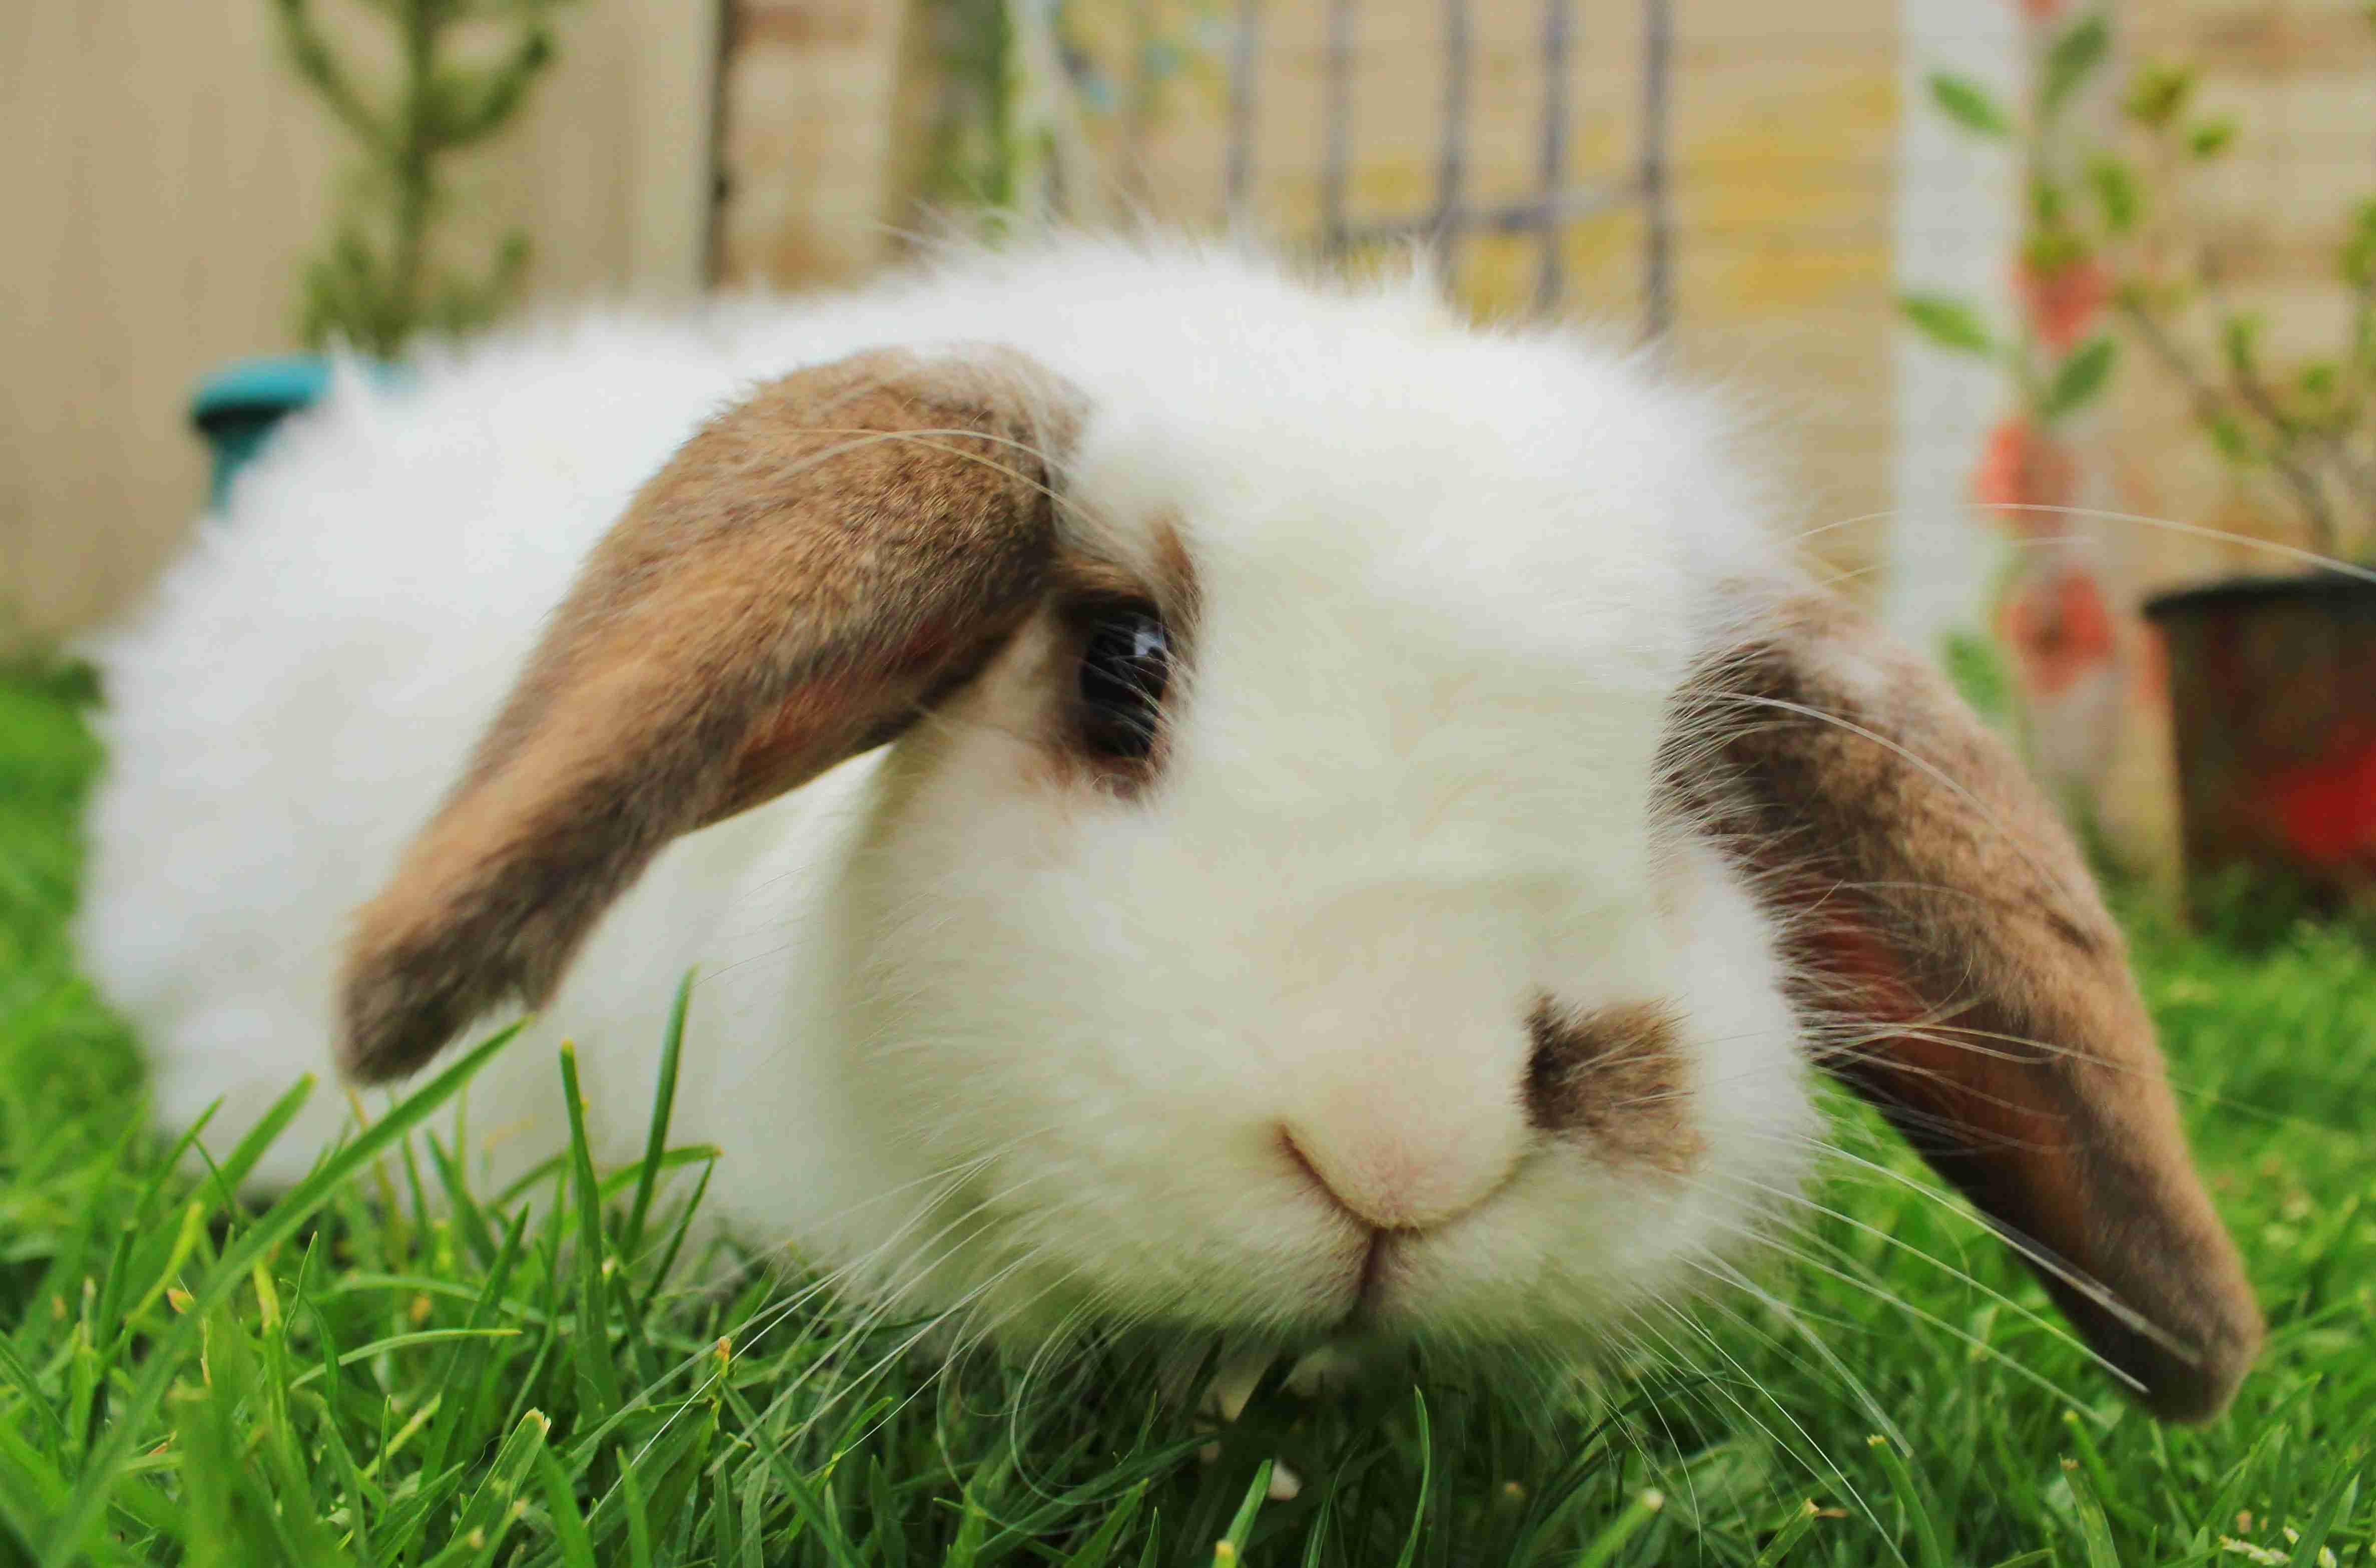 Top Tips for Providing Your Rabbit with a Balanced Diet